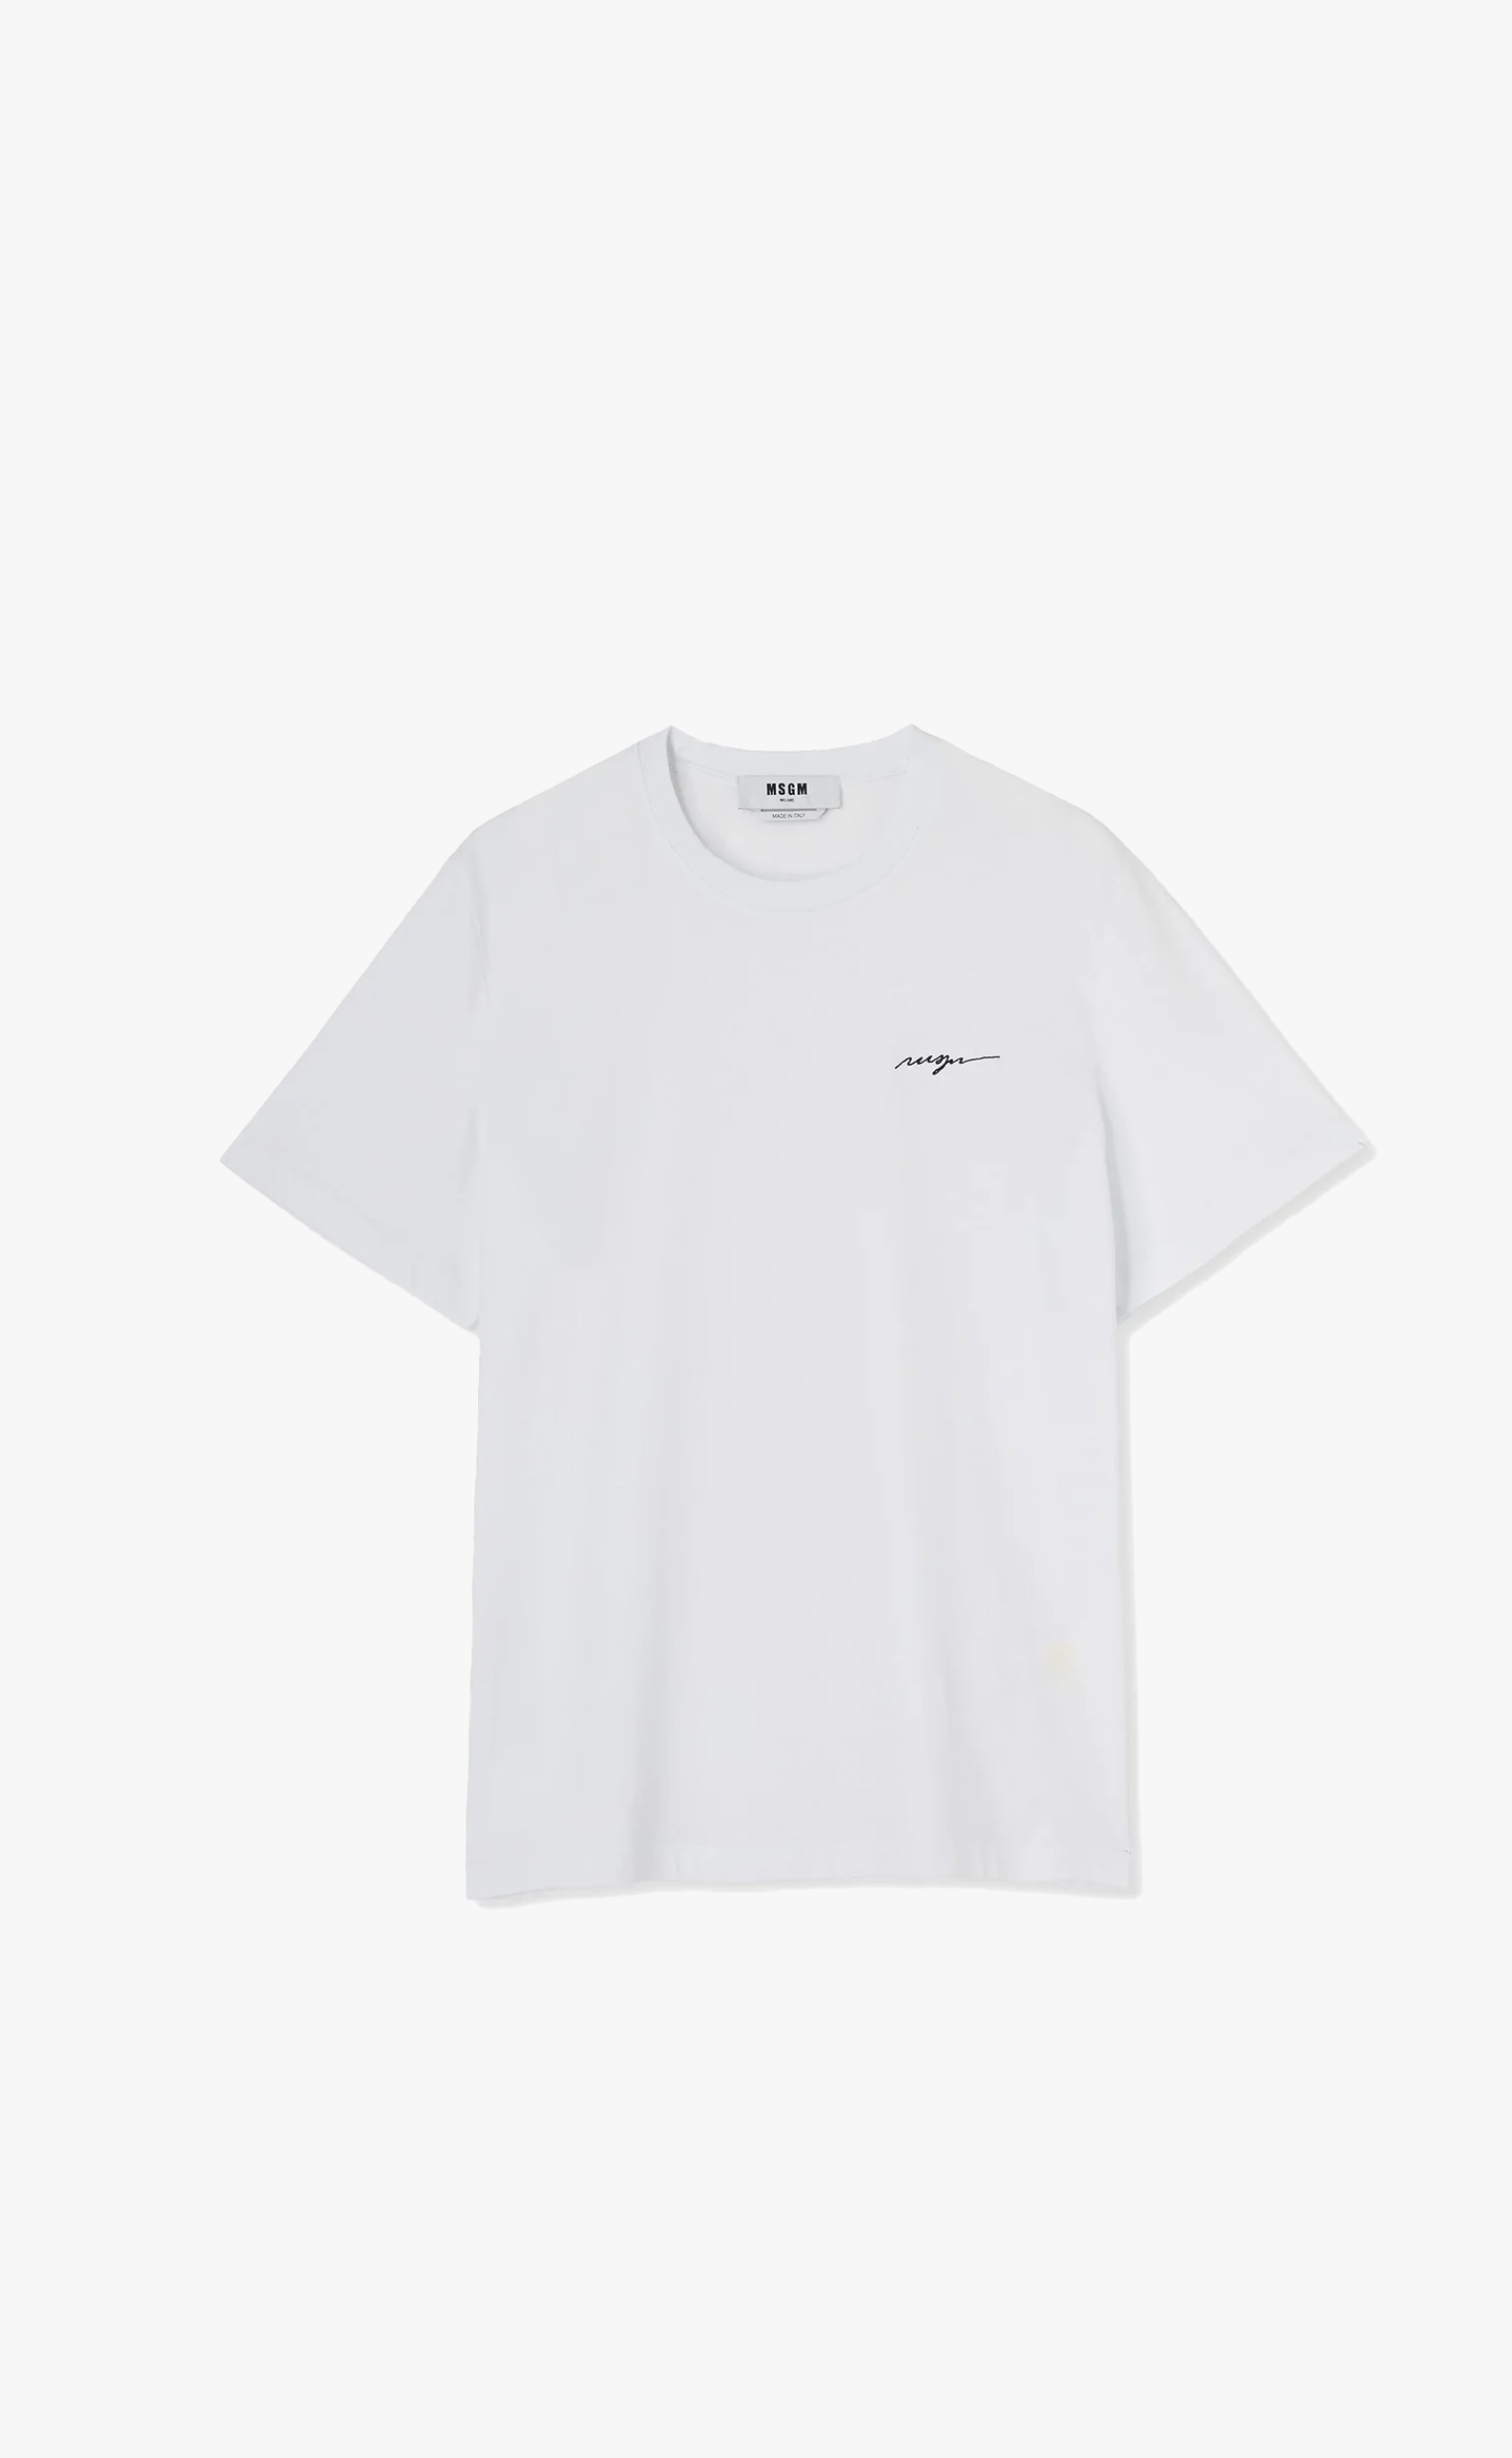  EMBROIDERED CURSIVE LOGO OFF WHITE T-SHIRT